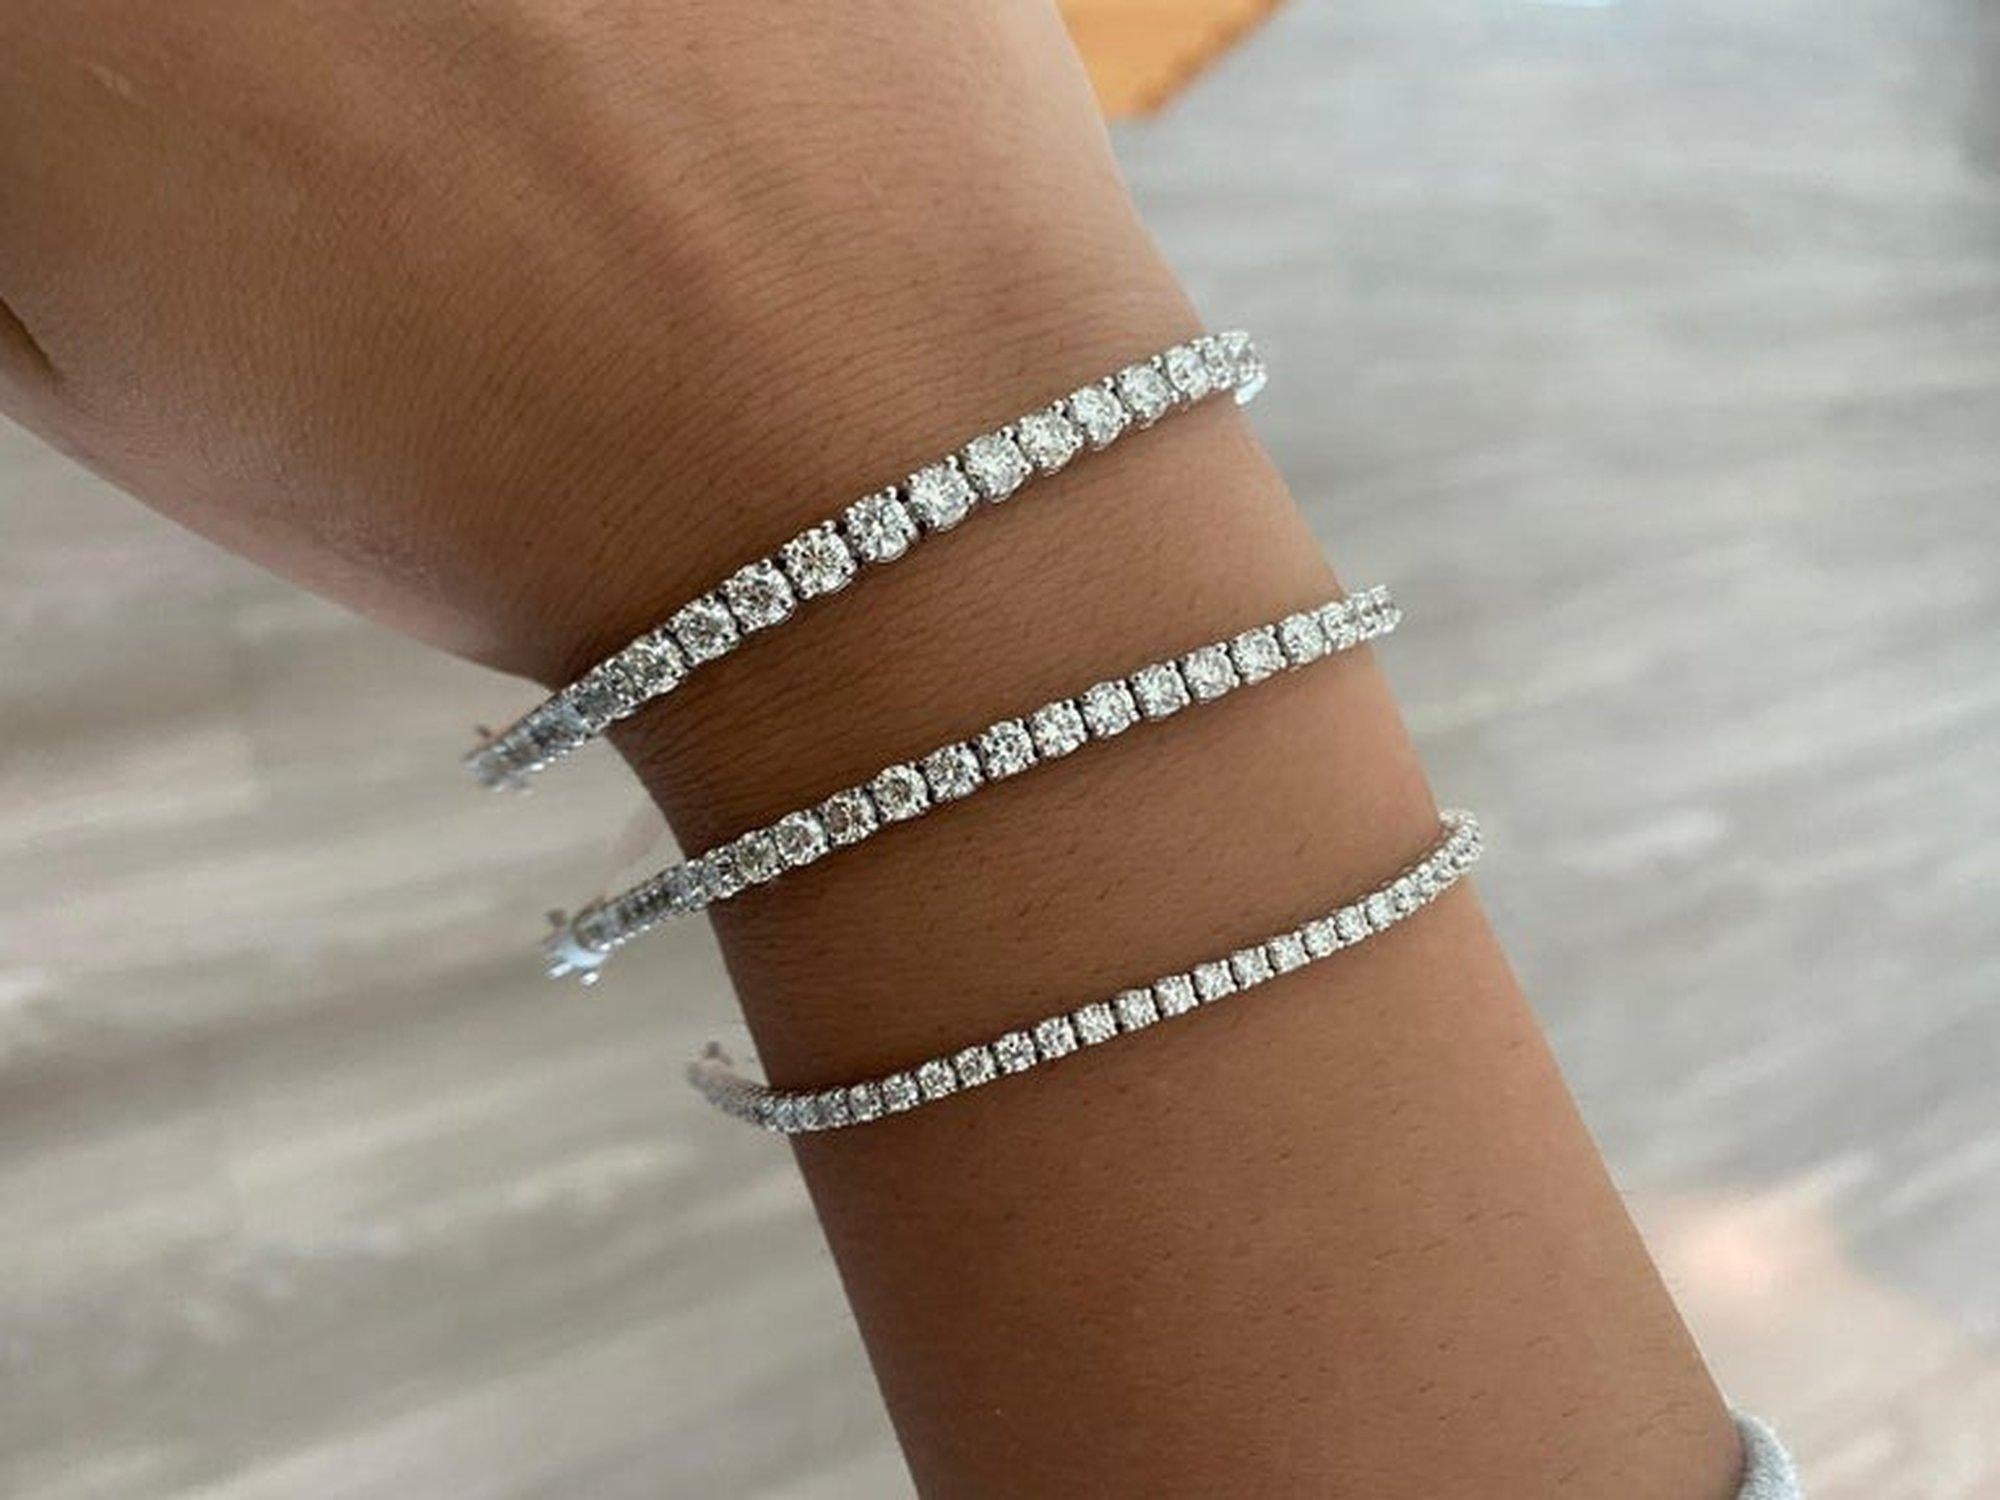 This Classic Diamond Tennis Bracelet is beautifully set in a 4-Prong Setting. The round diamond tennis bracelet is one of our customer's favorites. Its simplicity is what makes it so popular and easy to match and stack with any other